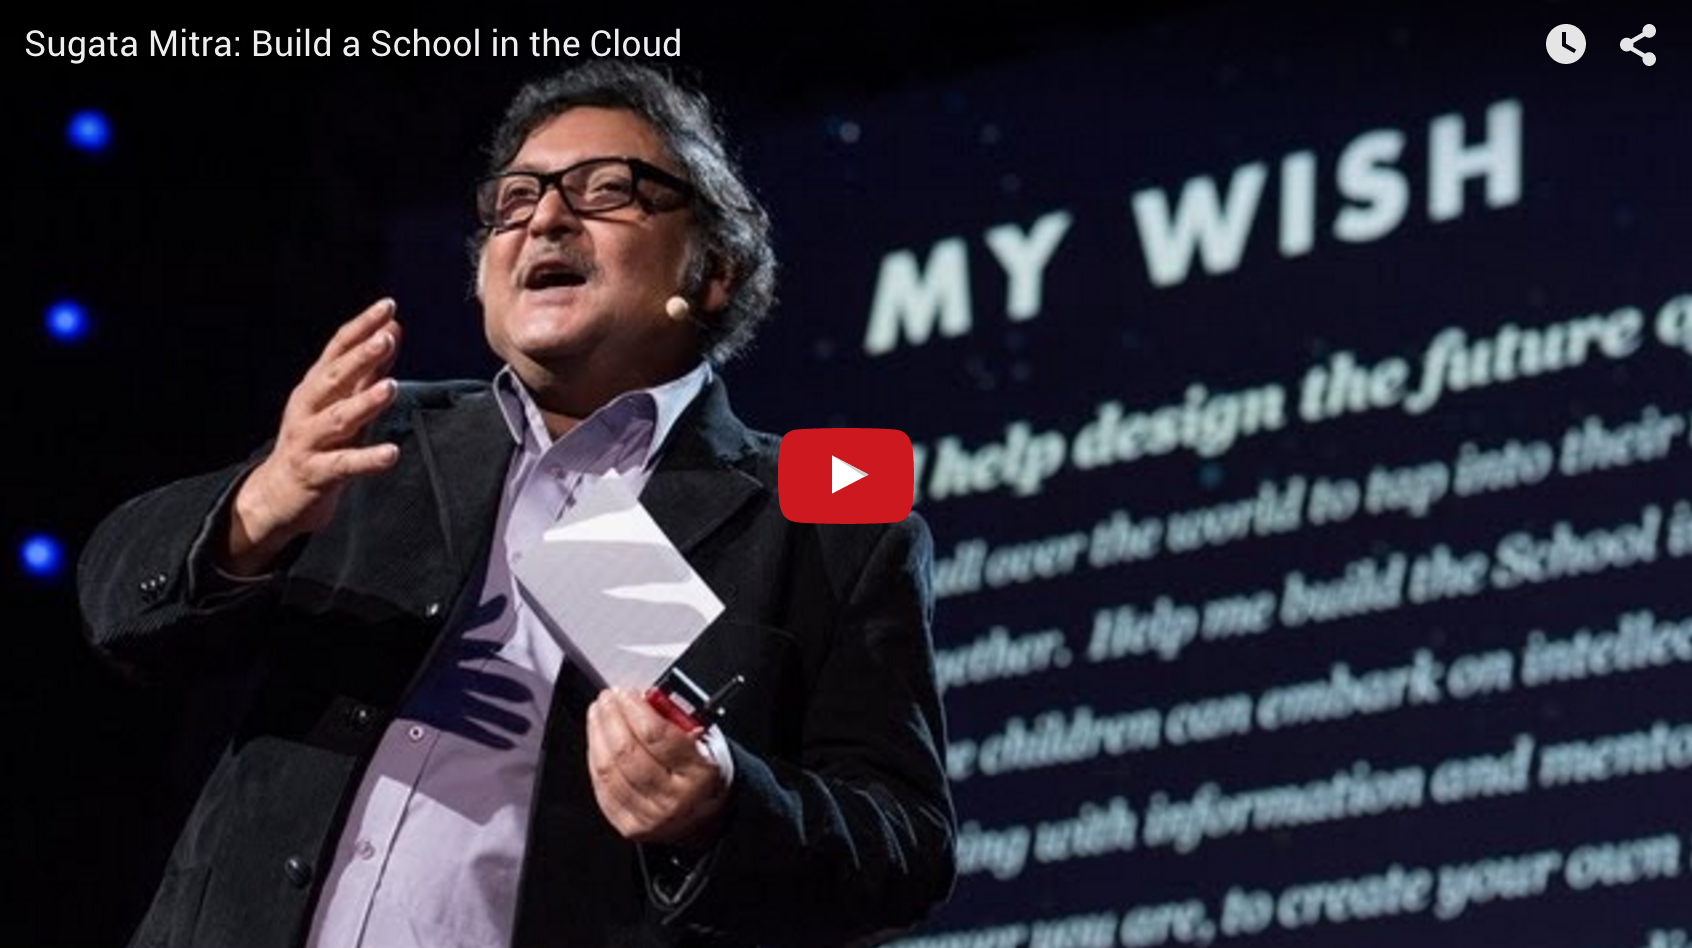 TED: Sugata Mitra: Build a School in the Cloud